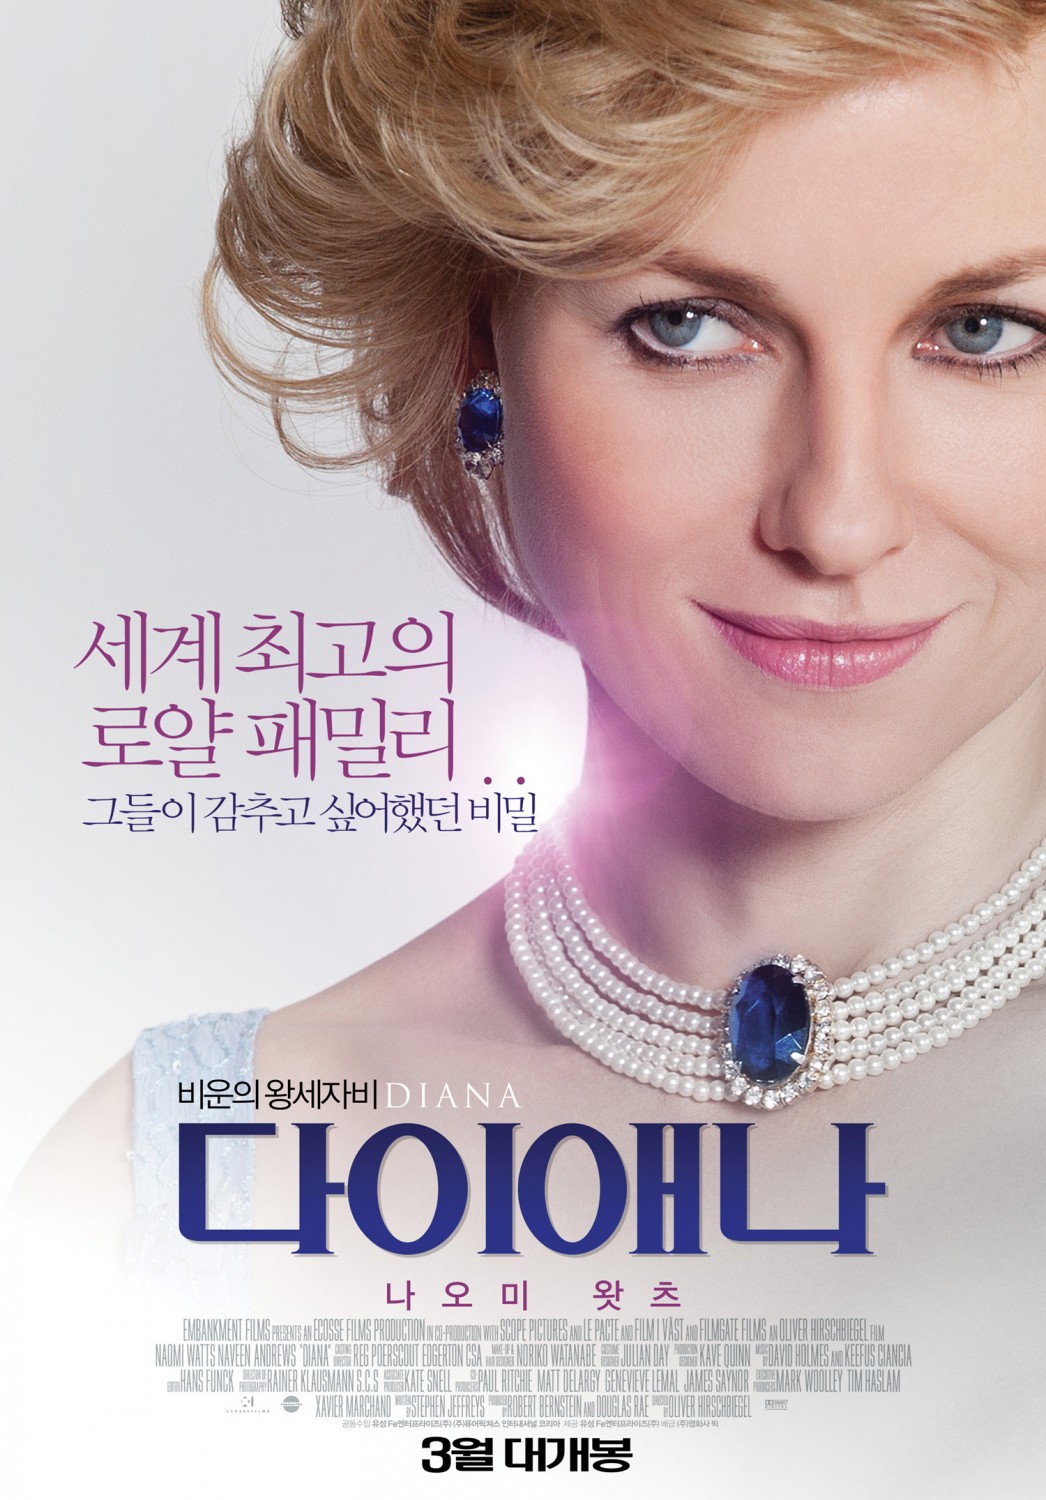 Extra Large Movie Poster Image for Diana (#6 of 6)